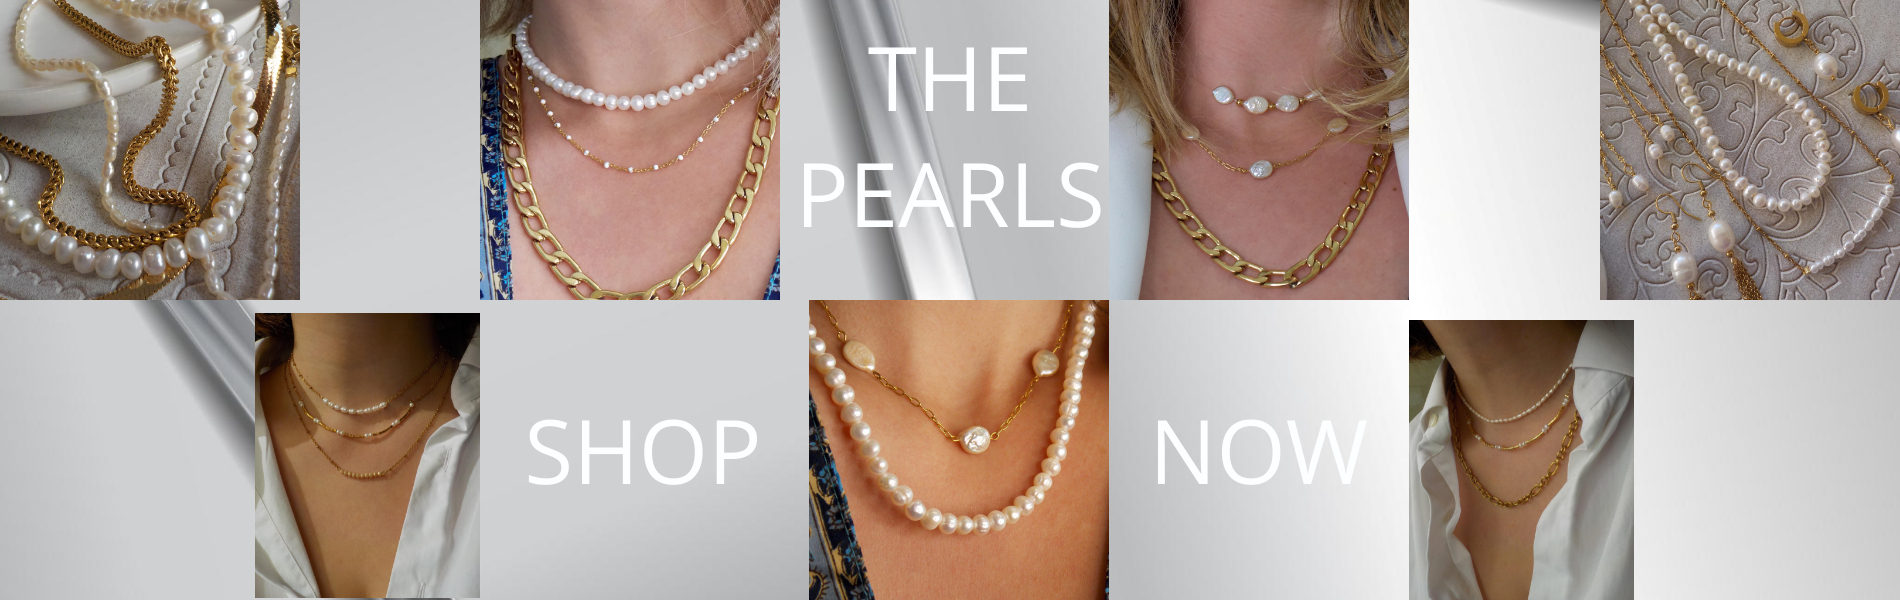 celestialtheshop-the-pearls- banner 1900X600